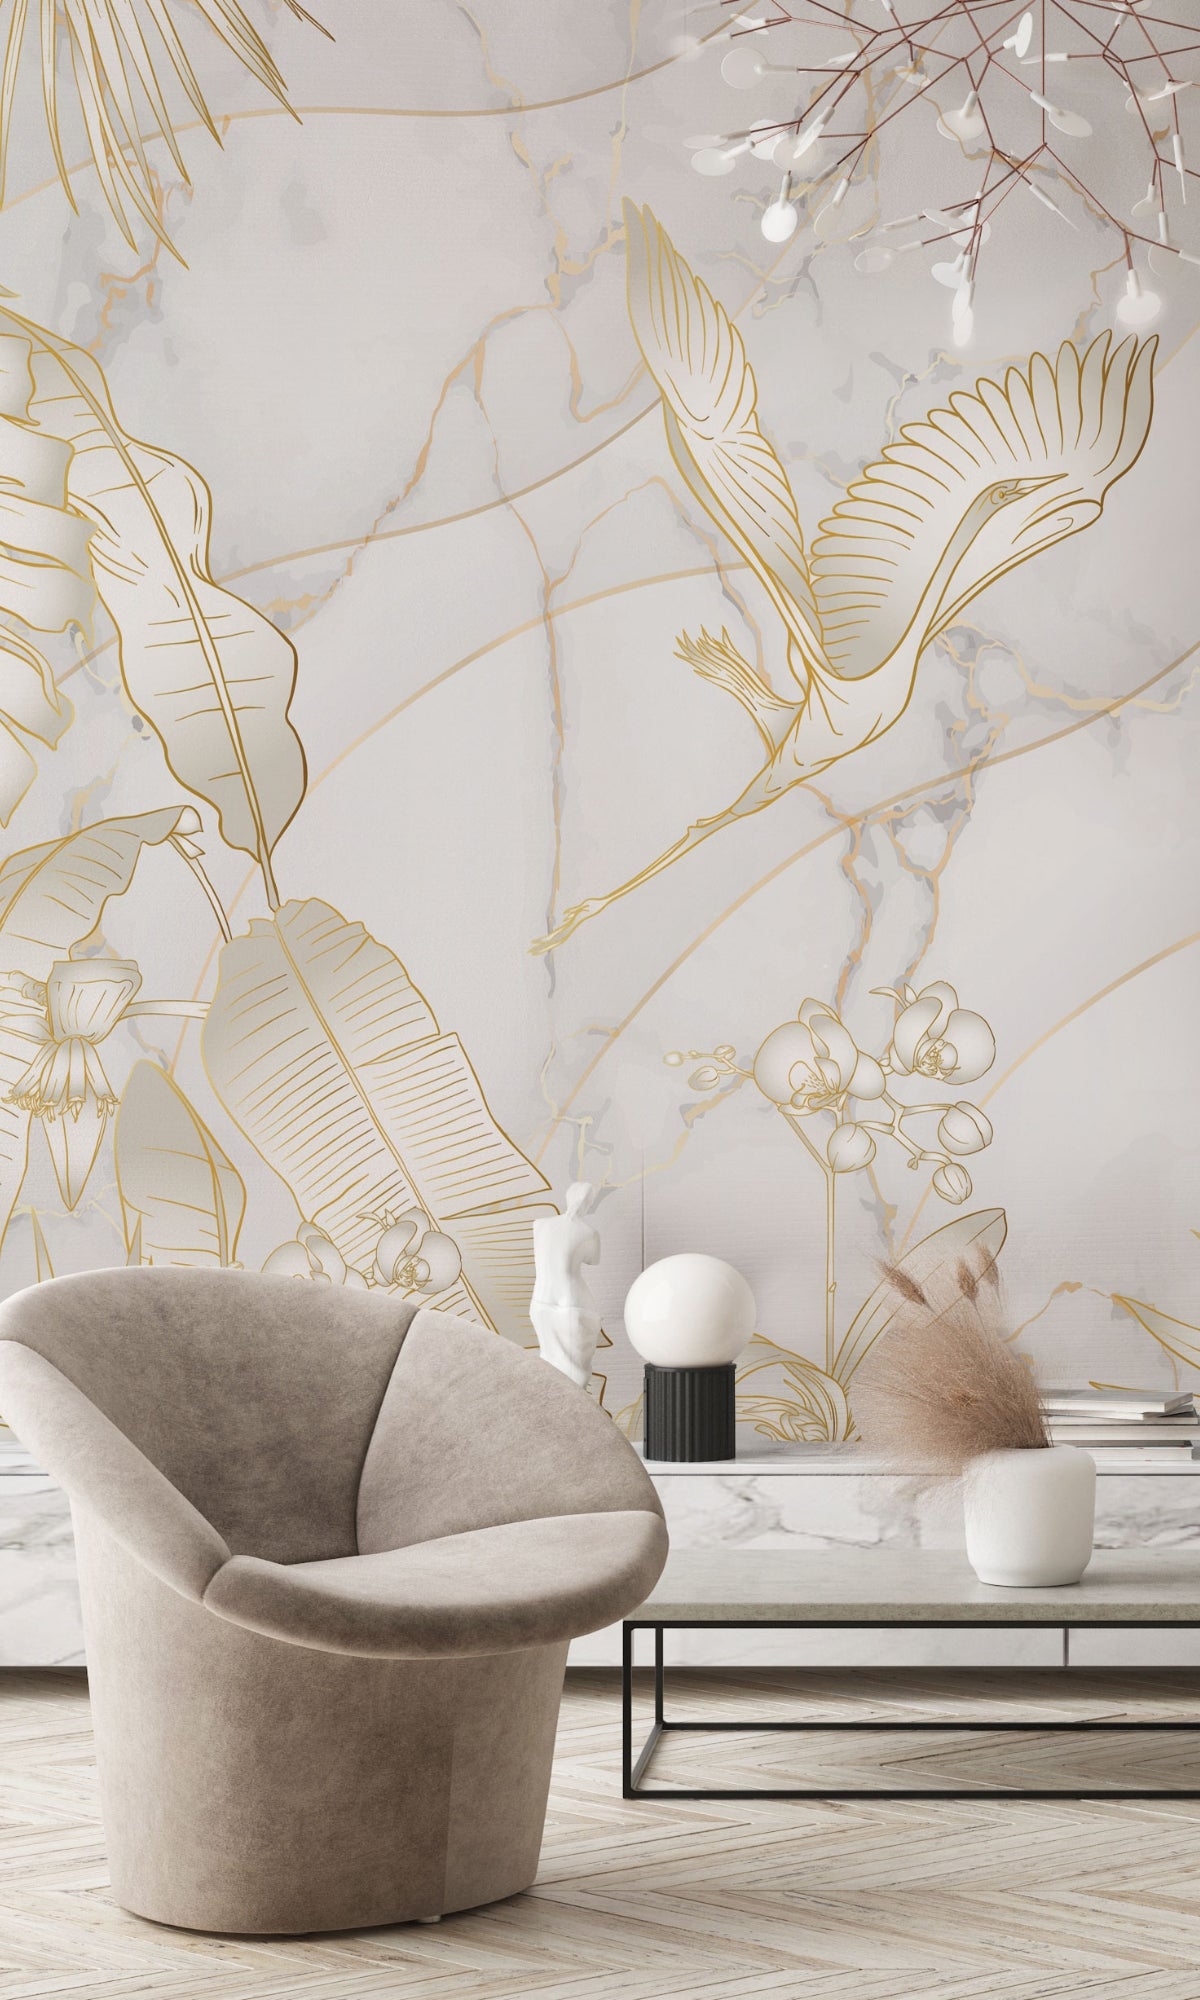 Gold Orchids and Birds Mural Wallpaper M1410